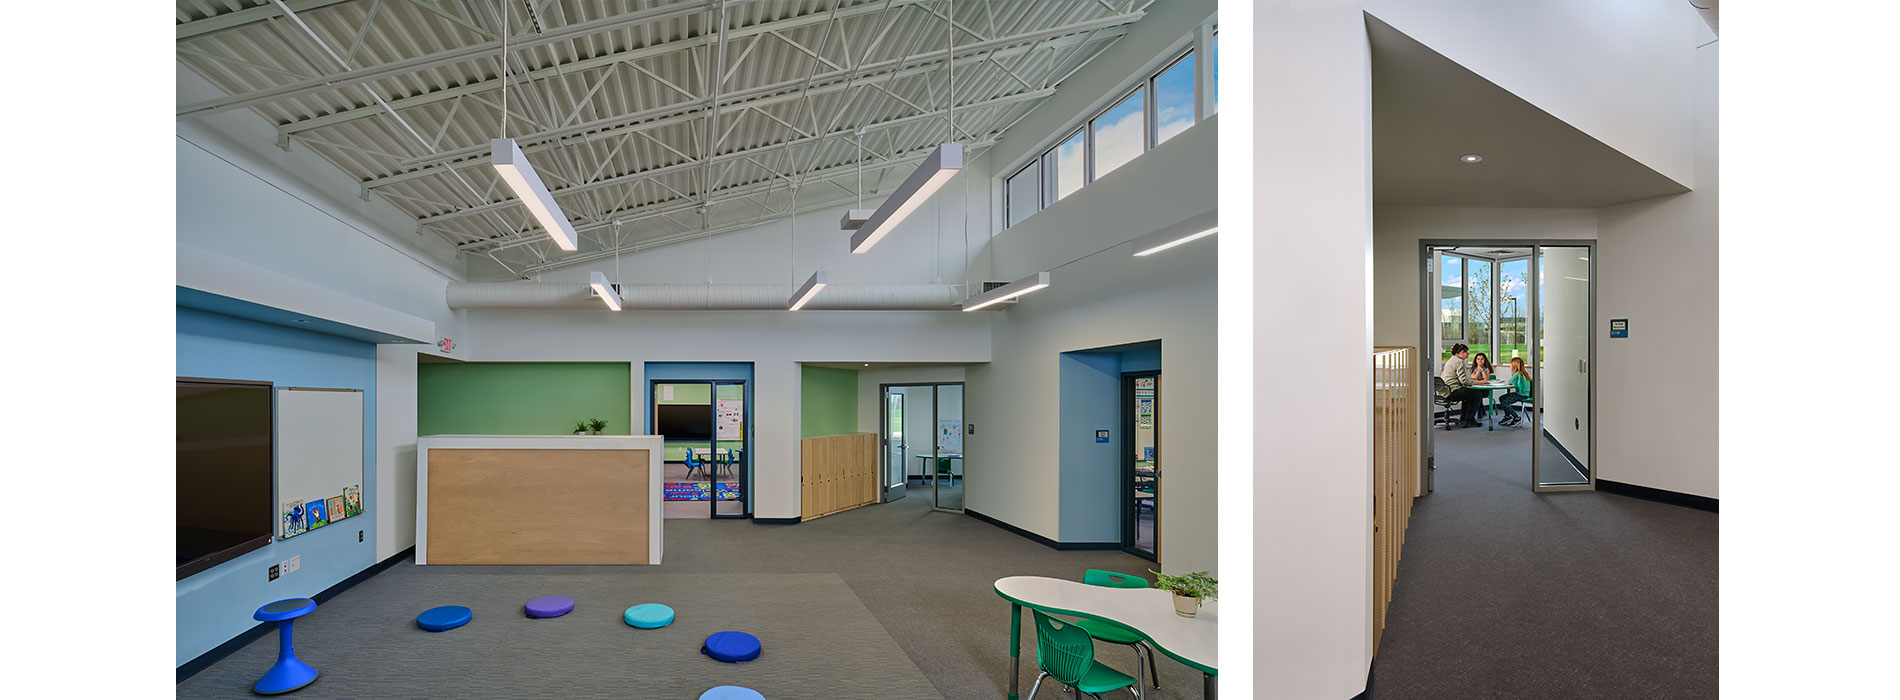 Winooski Schools elementary pod and break out space